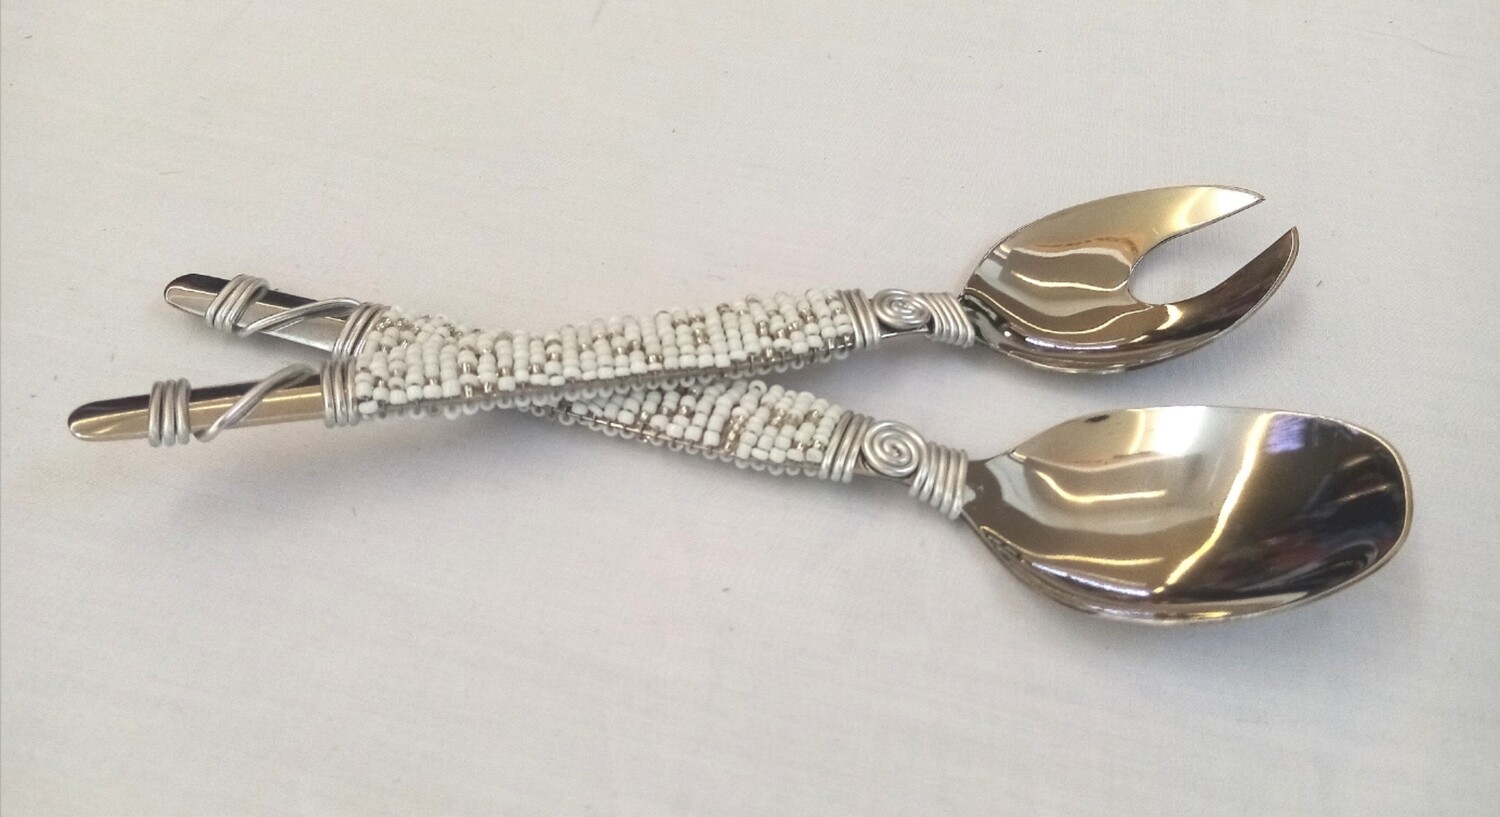 Salad Spoon Set - Beaded White and Silver